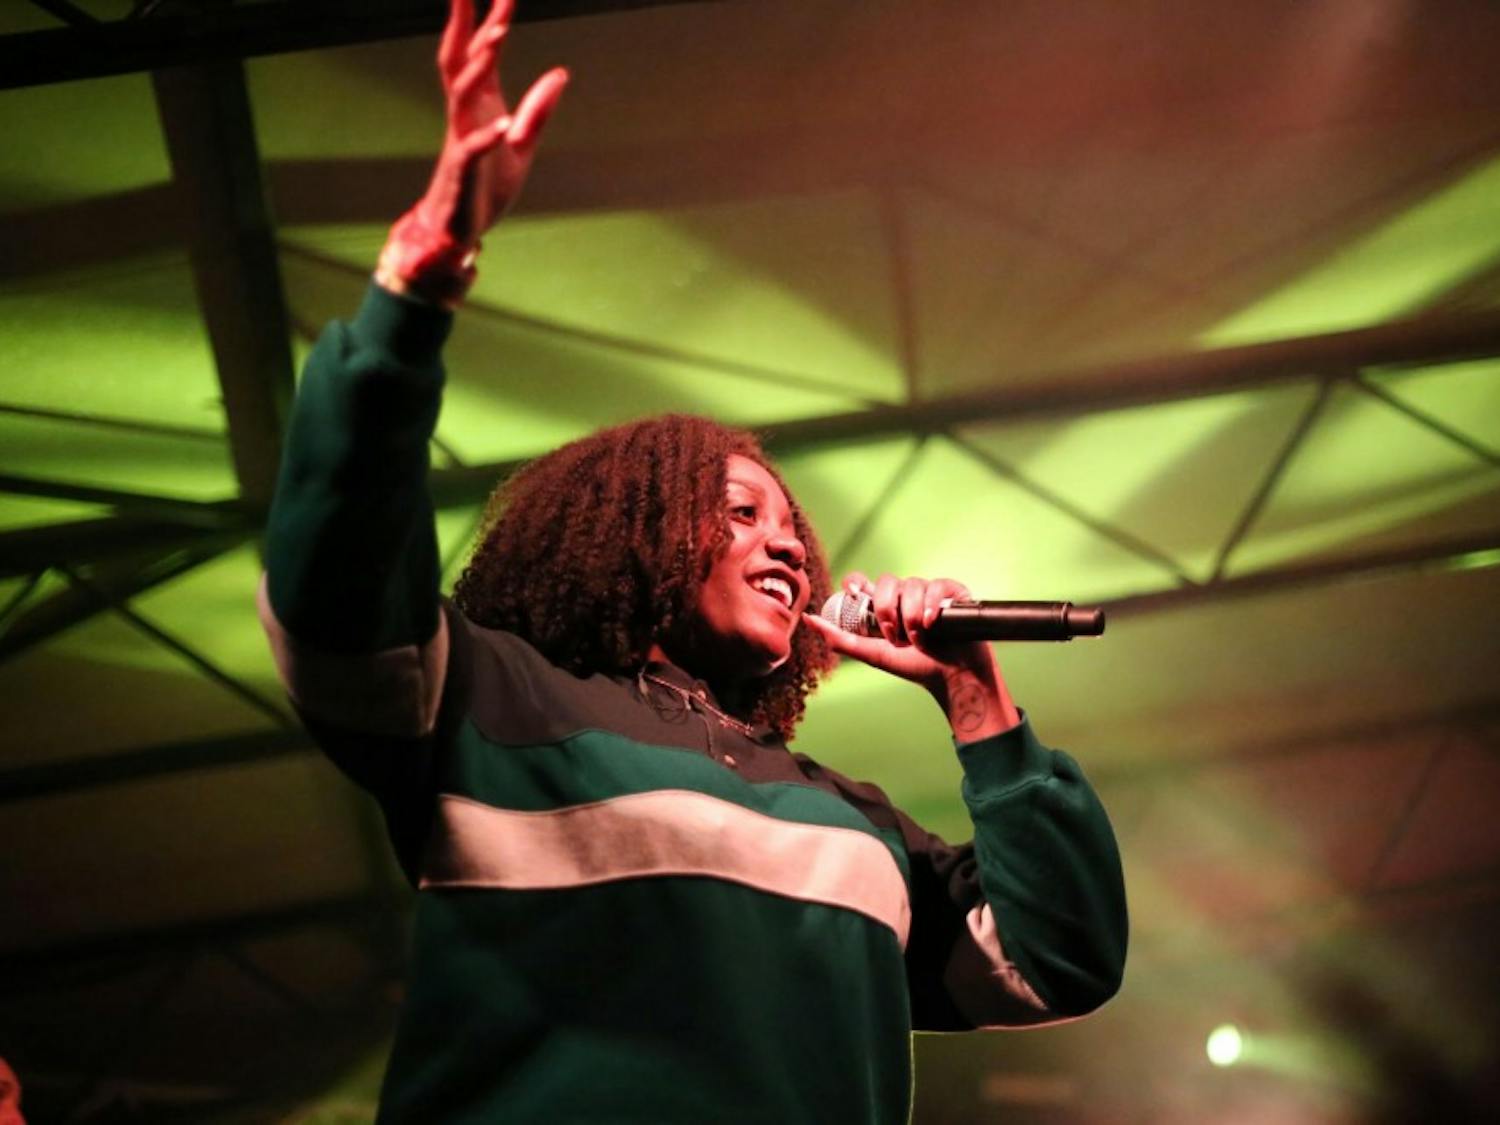 Noname gives a strong performance at SXSW this year.